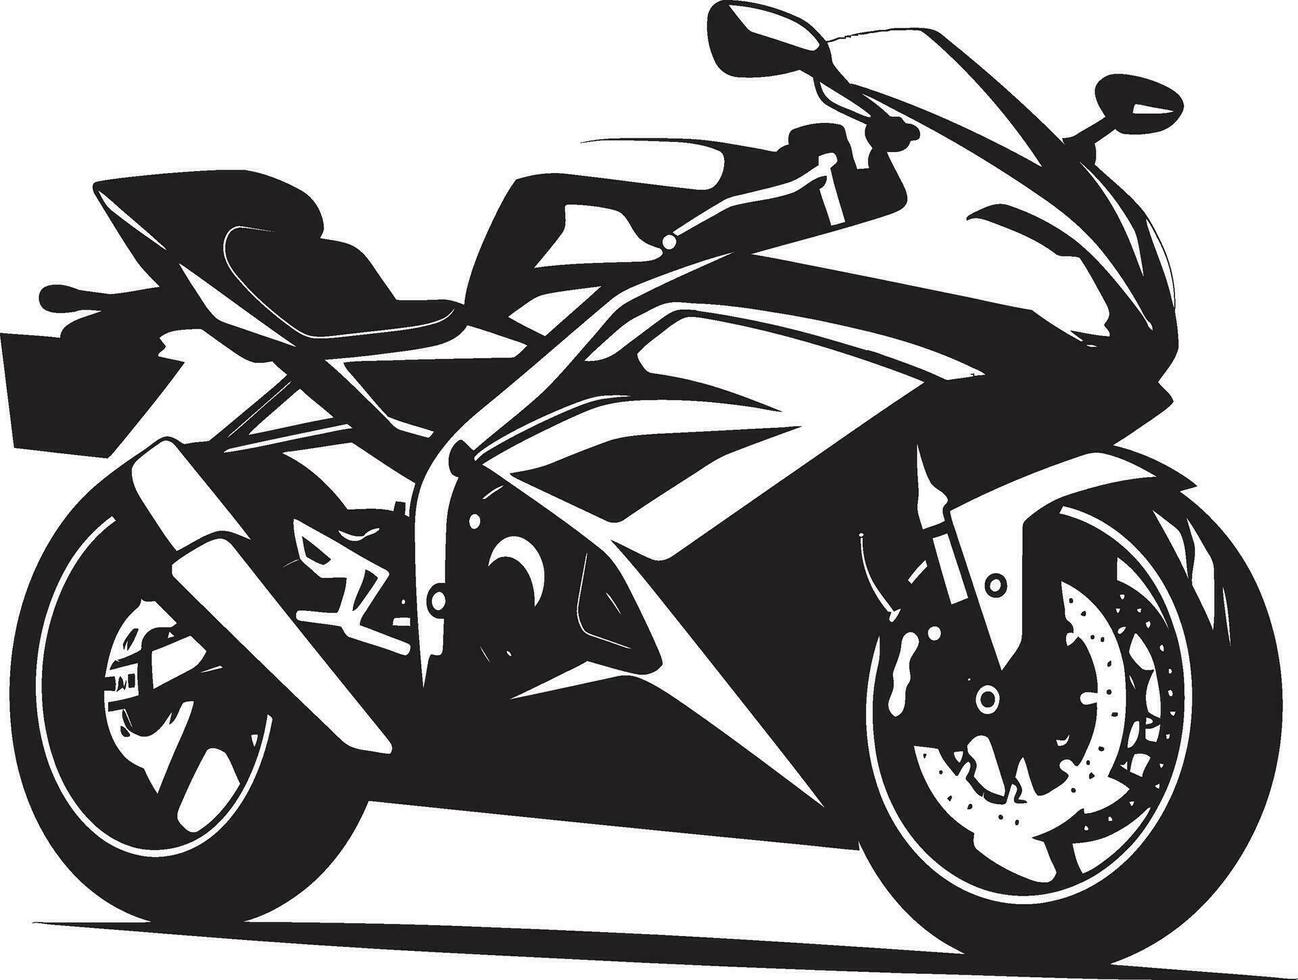 The Art of Speed Sports Bike Vectors Ride the Lines Vector Graphics of Sports Bikes